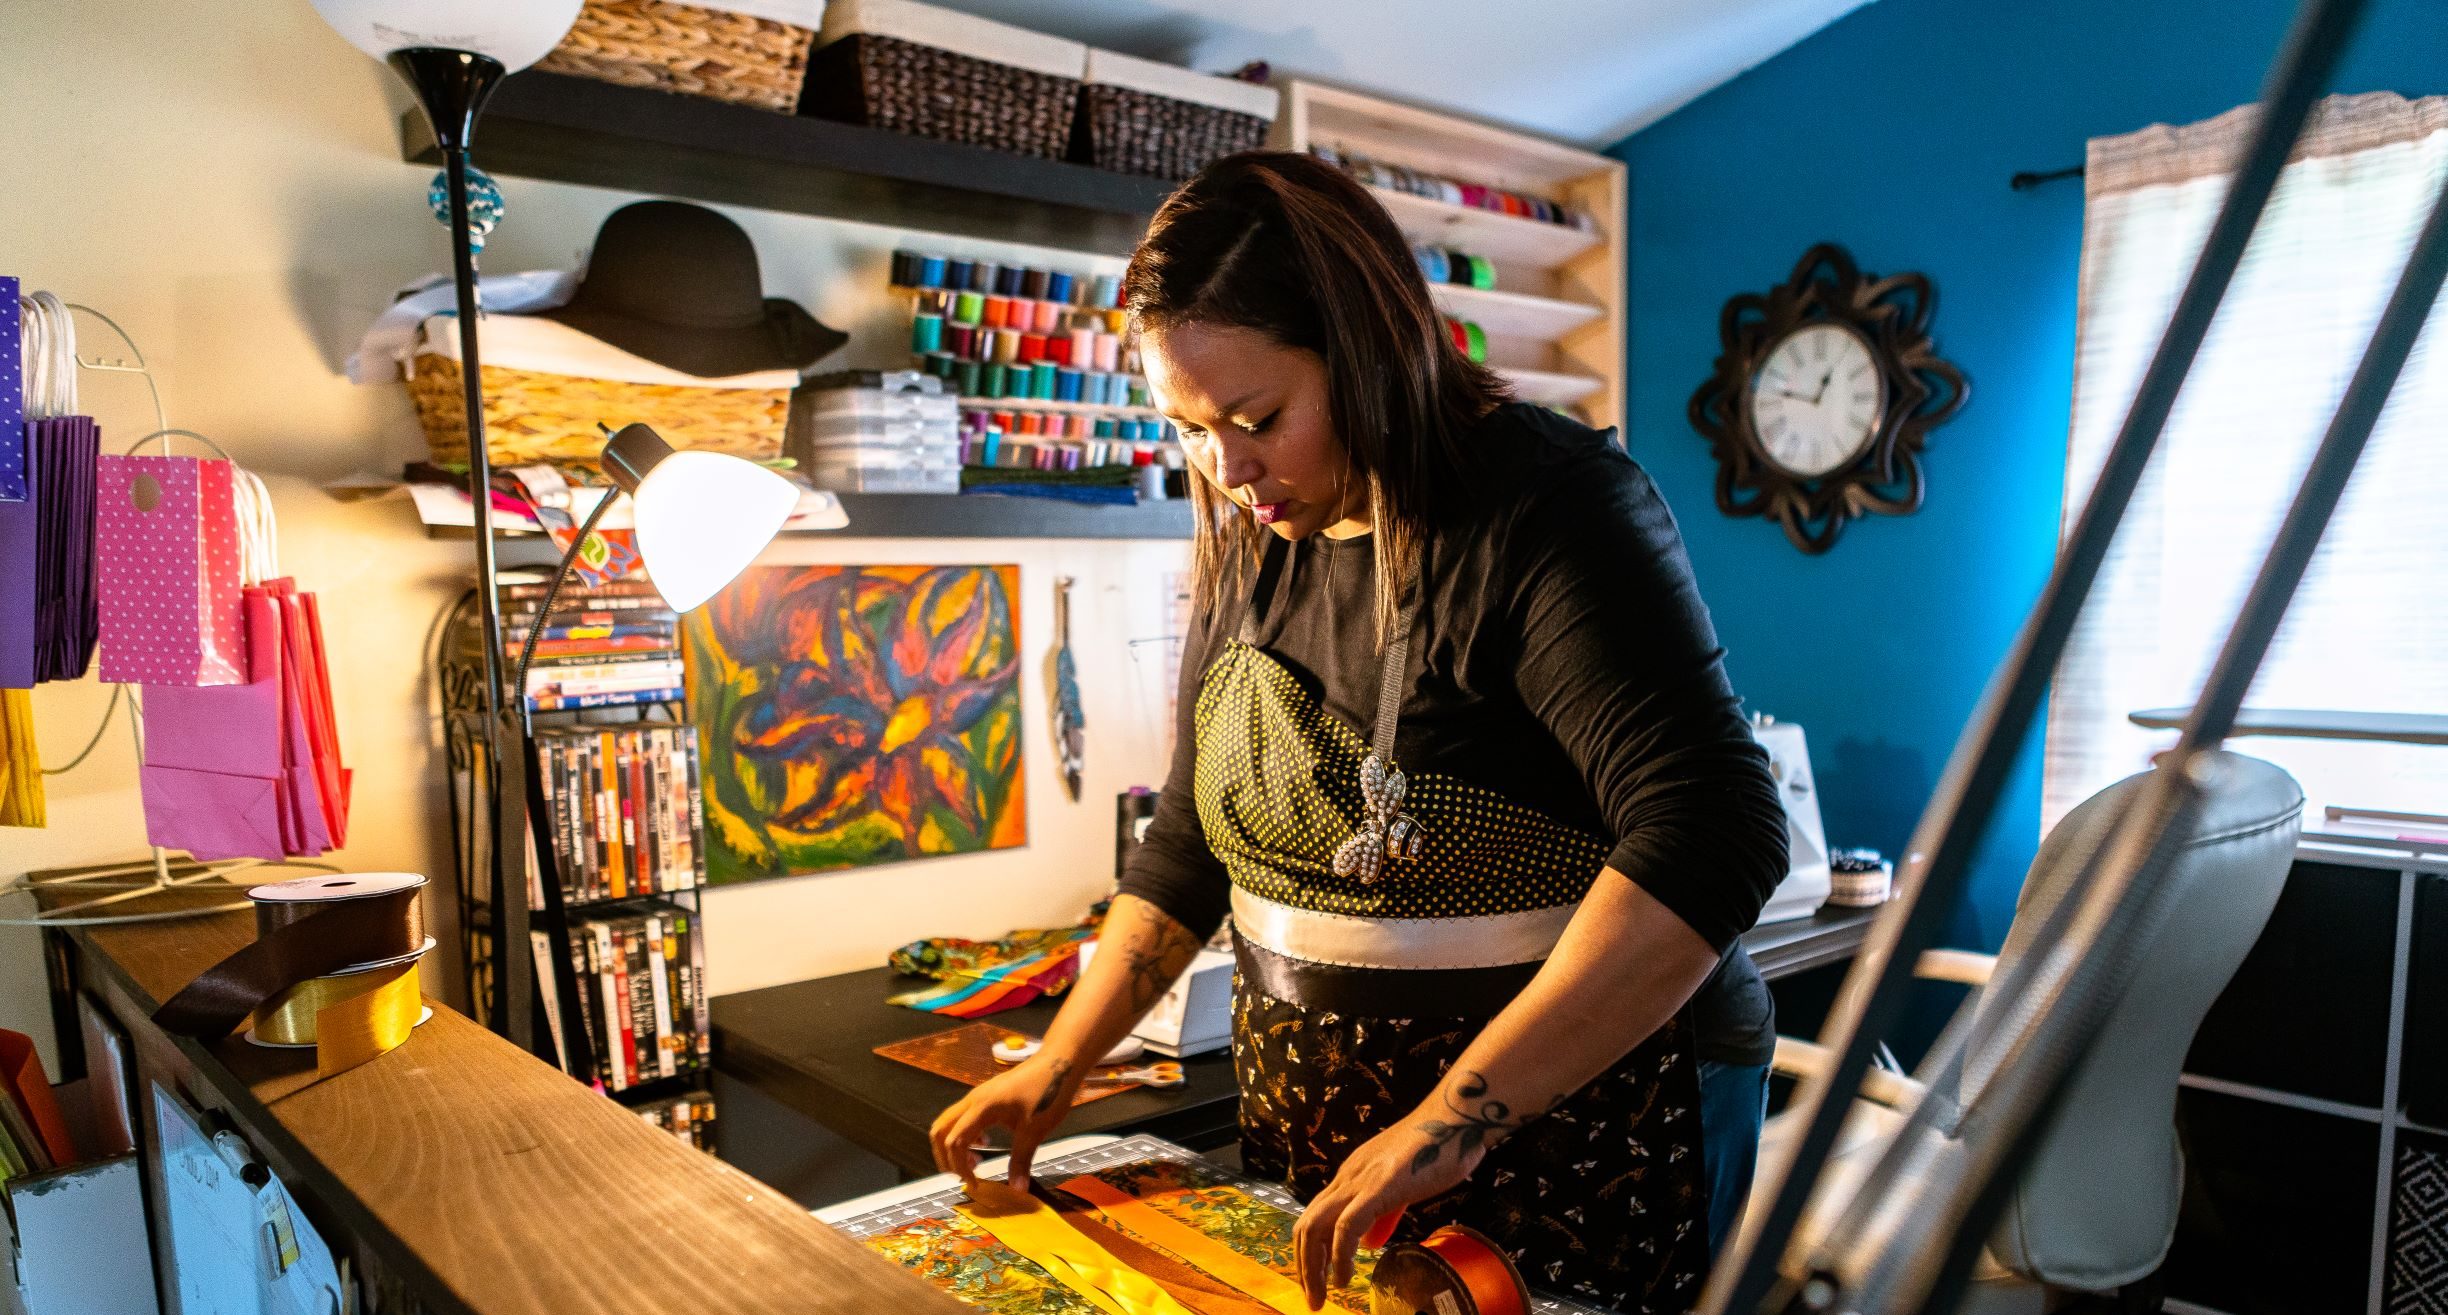 From the handmade jewelry and clothes to the paintings and baskets, Bee Creative is a haven of one-of-a-kind art and handmade items.